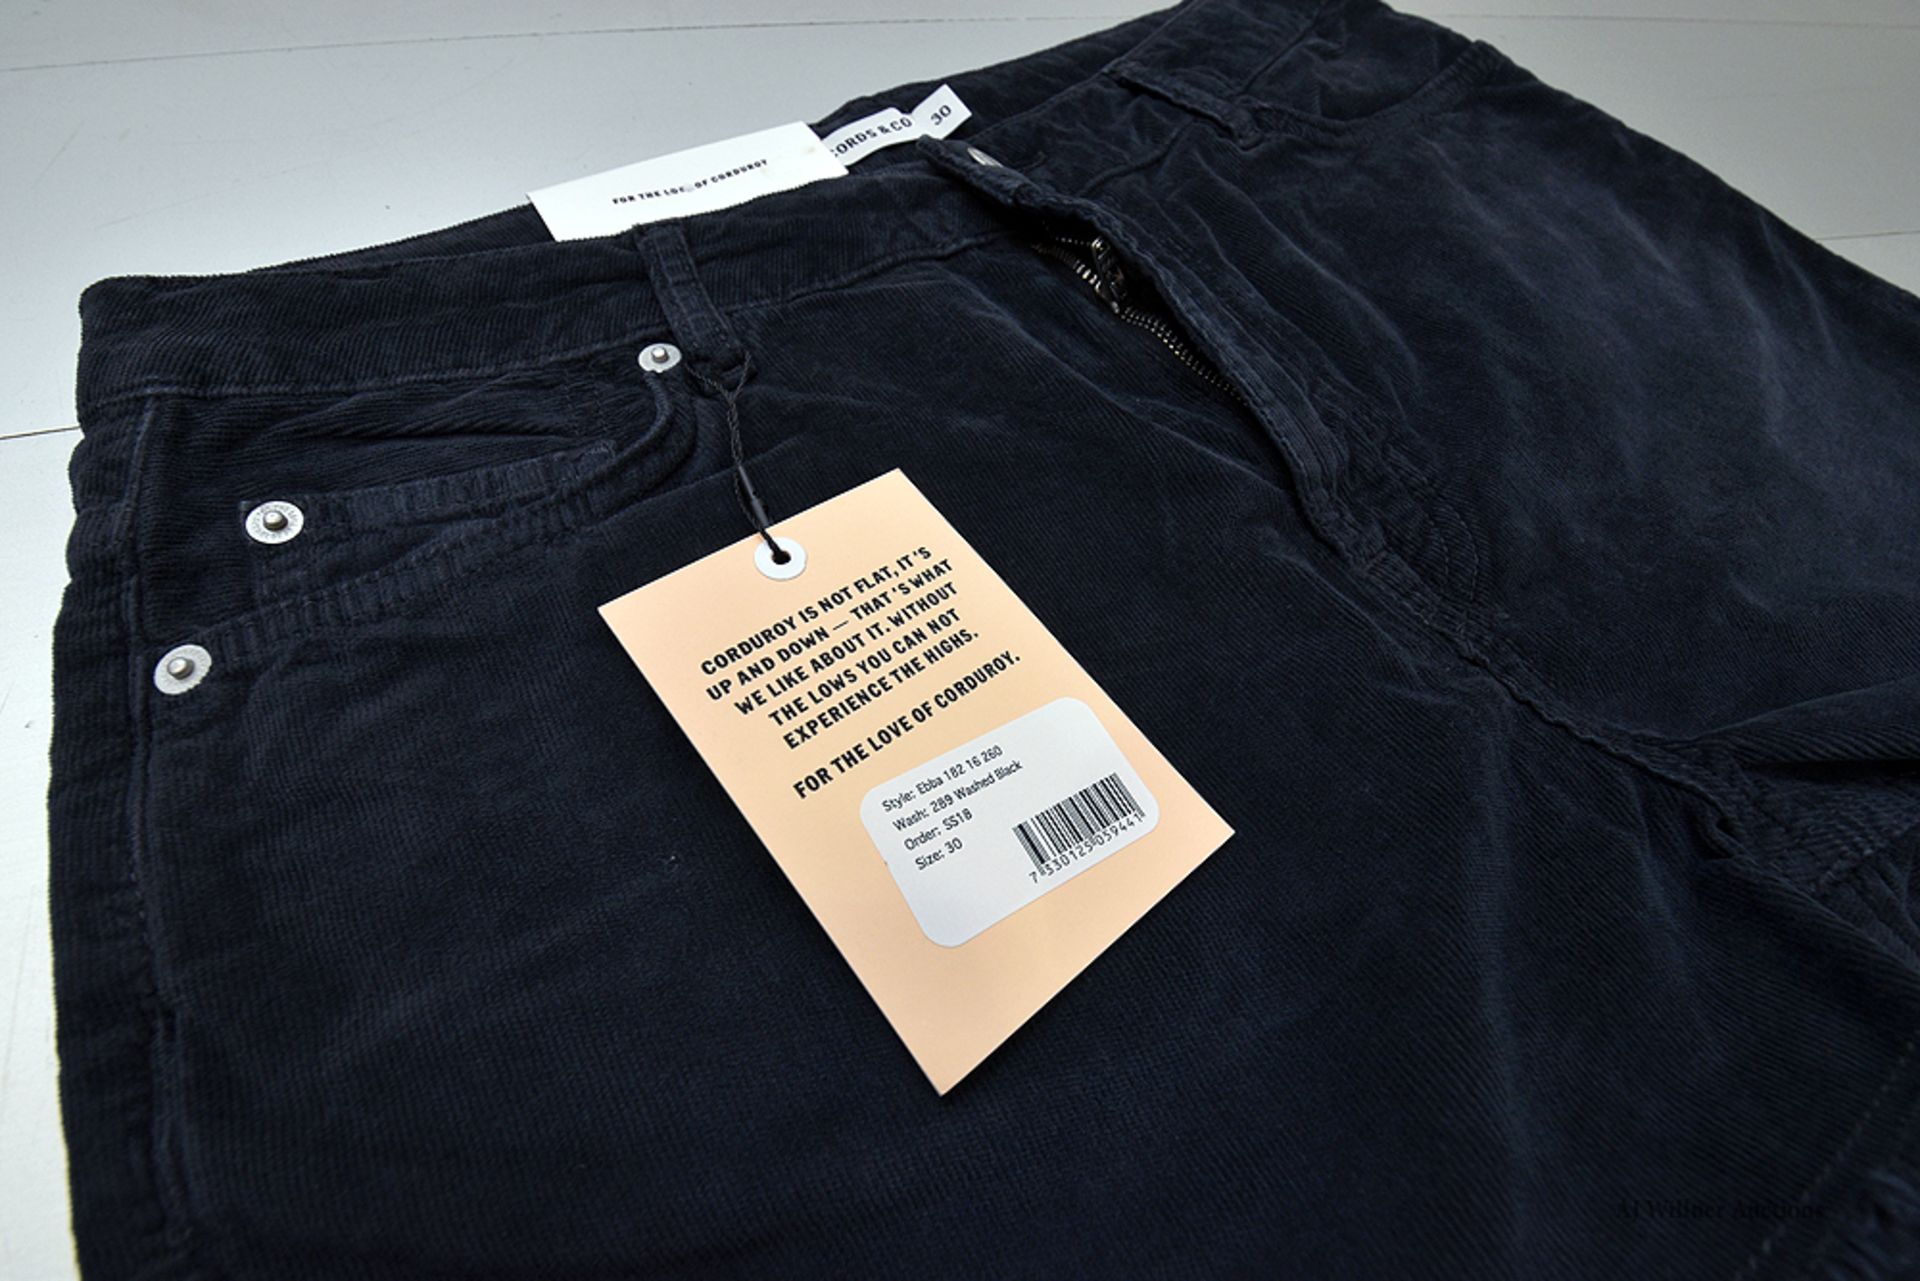 The Cords & Co."Ebba" Style, Women's/ 5-Pocket/ High-Waist/ Narrow Fit Shorts Black & Oatmeal - Image 4 of 6